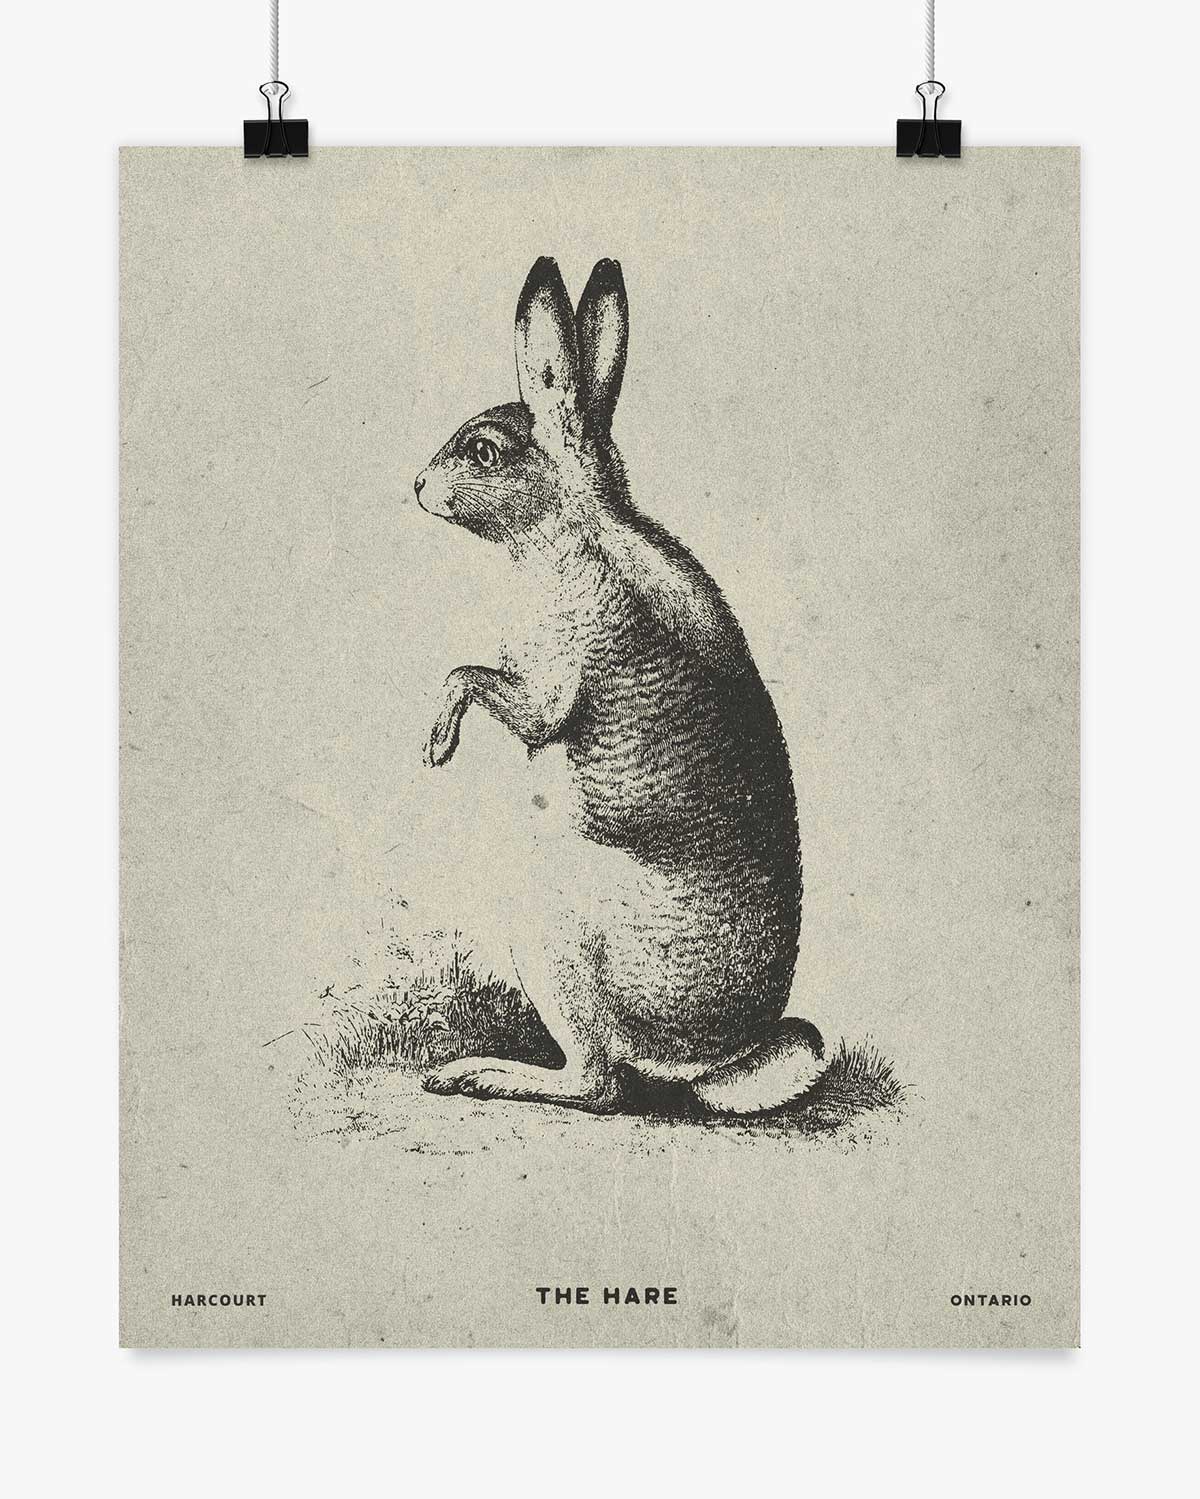 The Hare - Harcourt - Wall Art